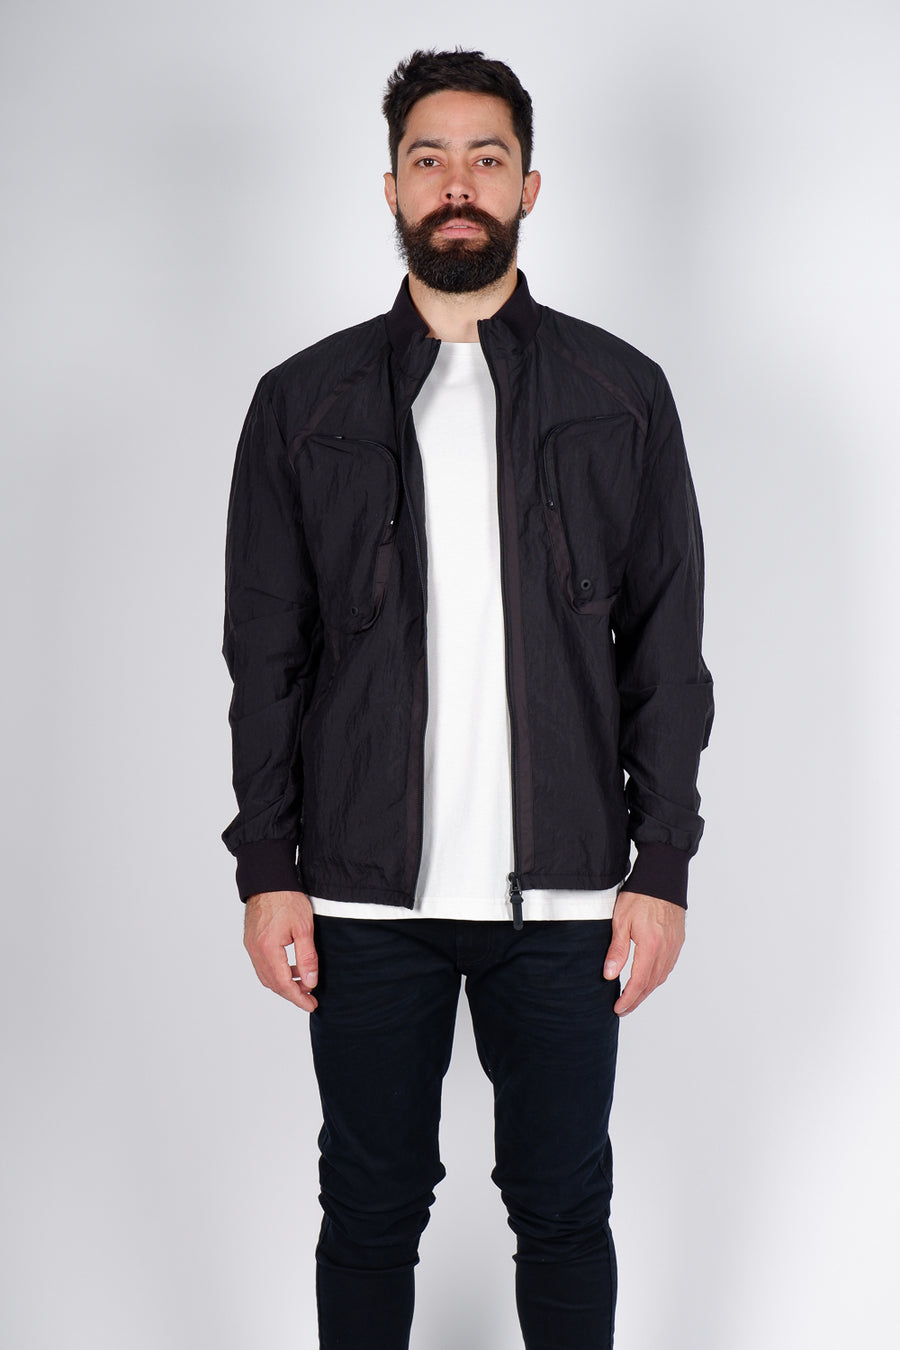 Buy the Antony Morato Nylon Regular Fit Jacket Black at Intro. Spend £50 for free UK delivery. Official stockists. We ship worldwide.